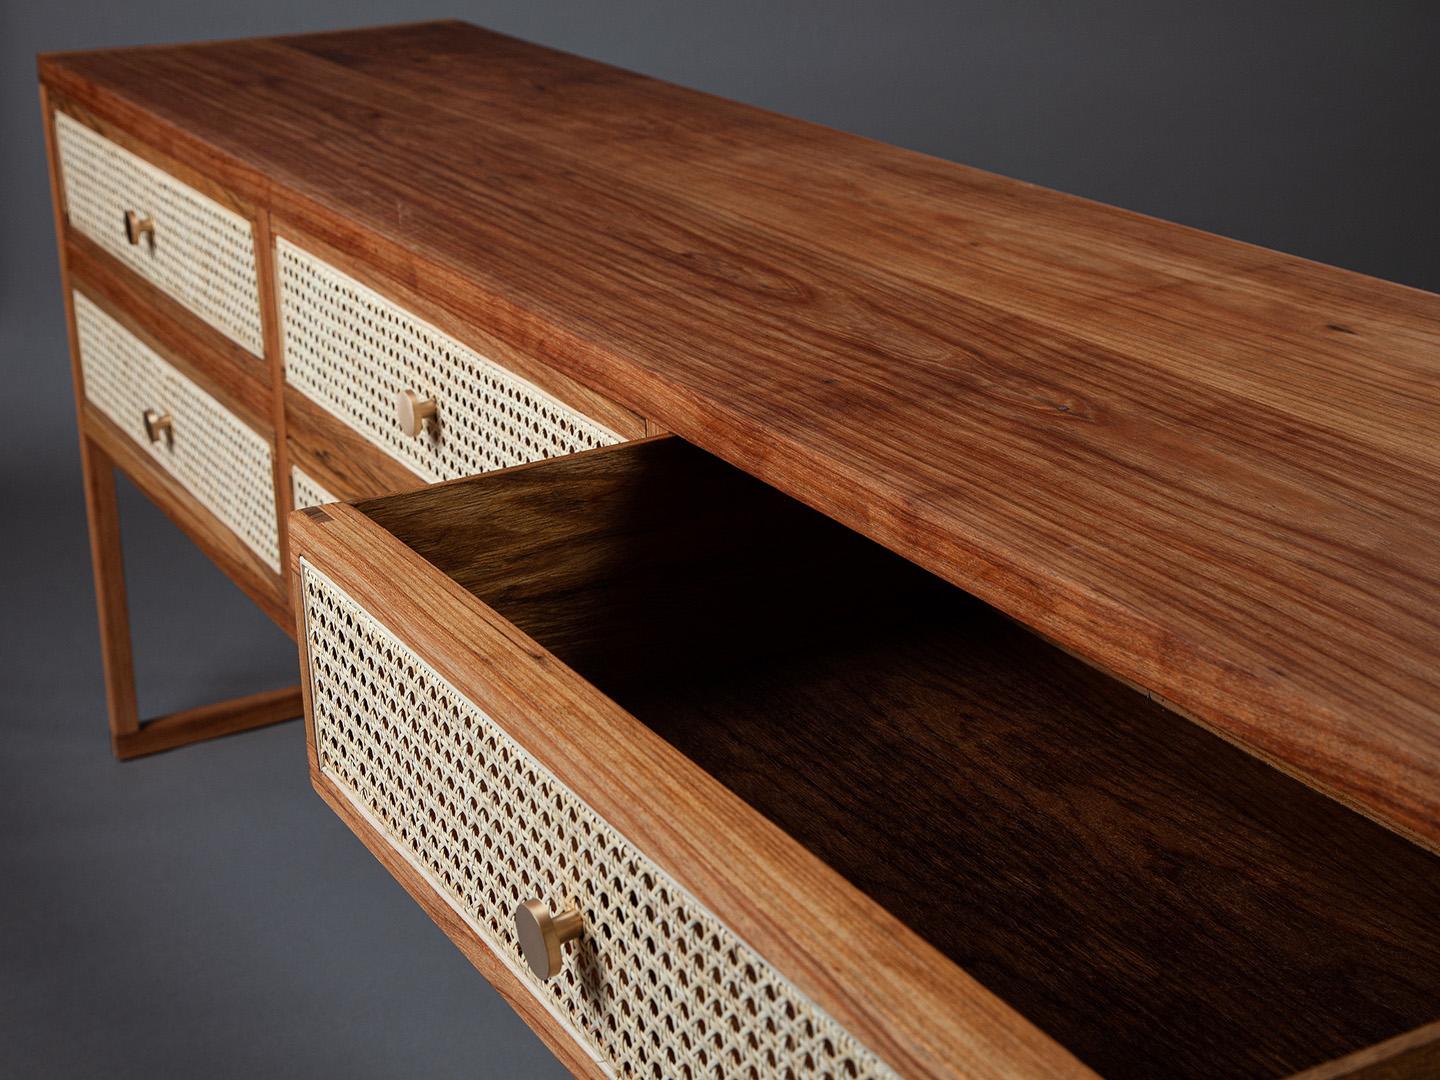 The Square Dresser. Brazilian Solid Wood and Natural Straw In New Condition For Sale In São Paulo, SP